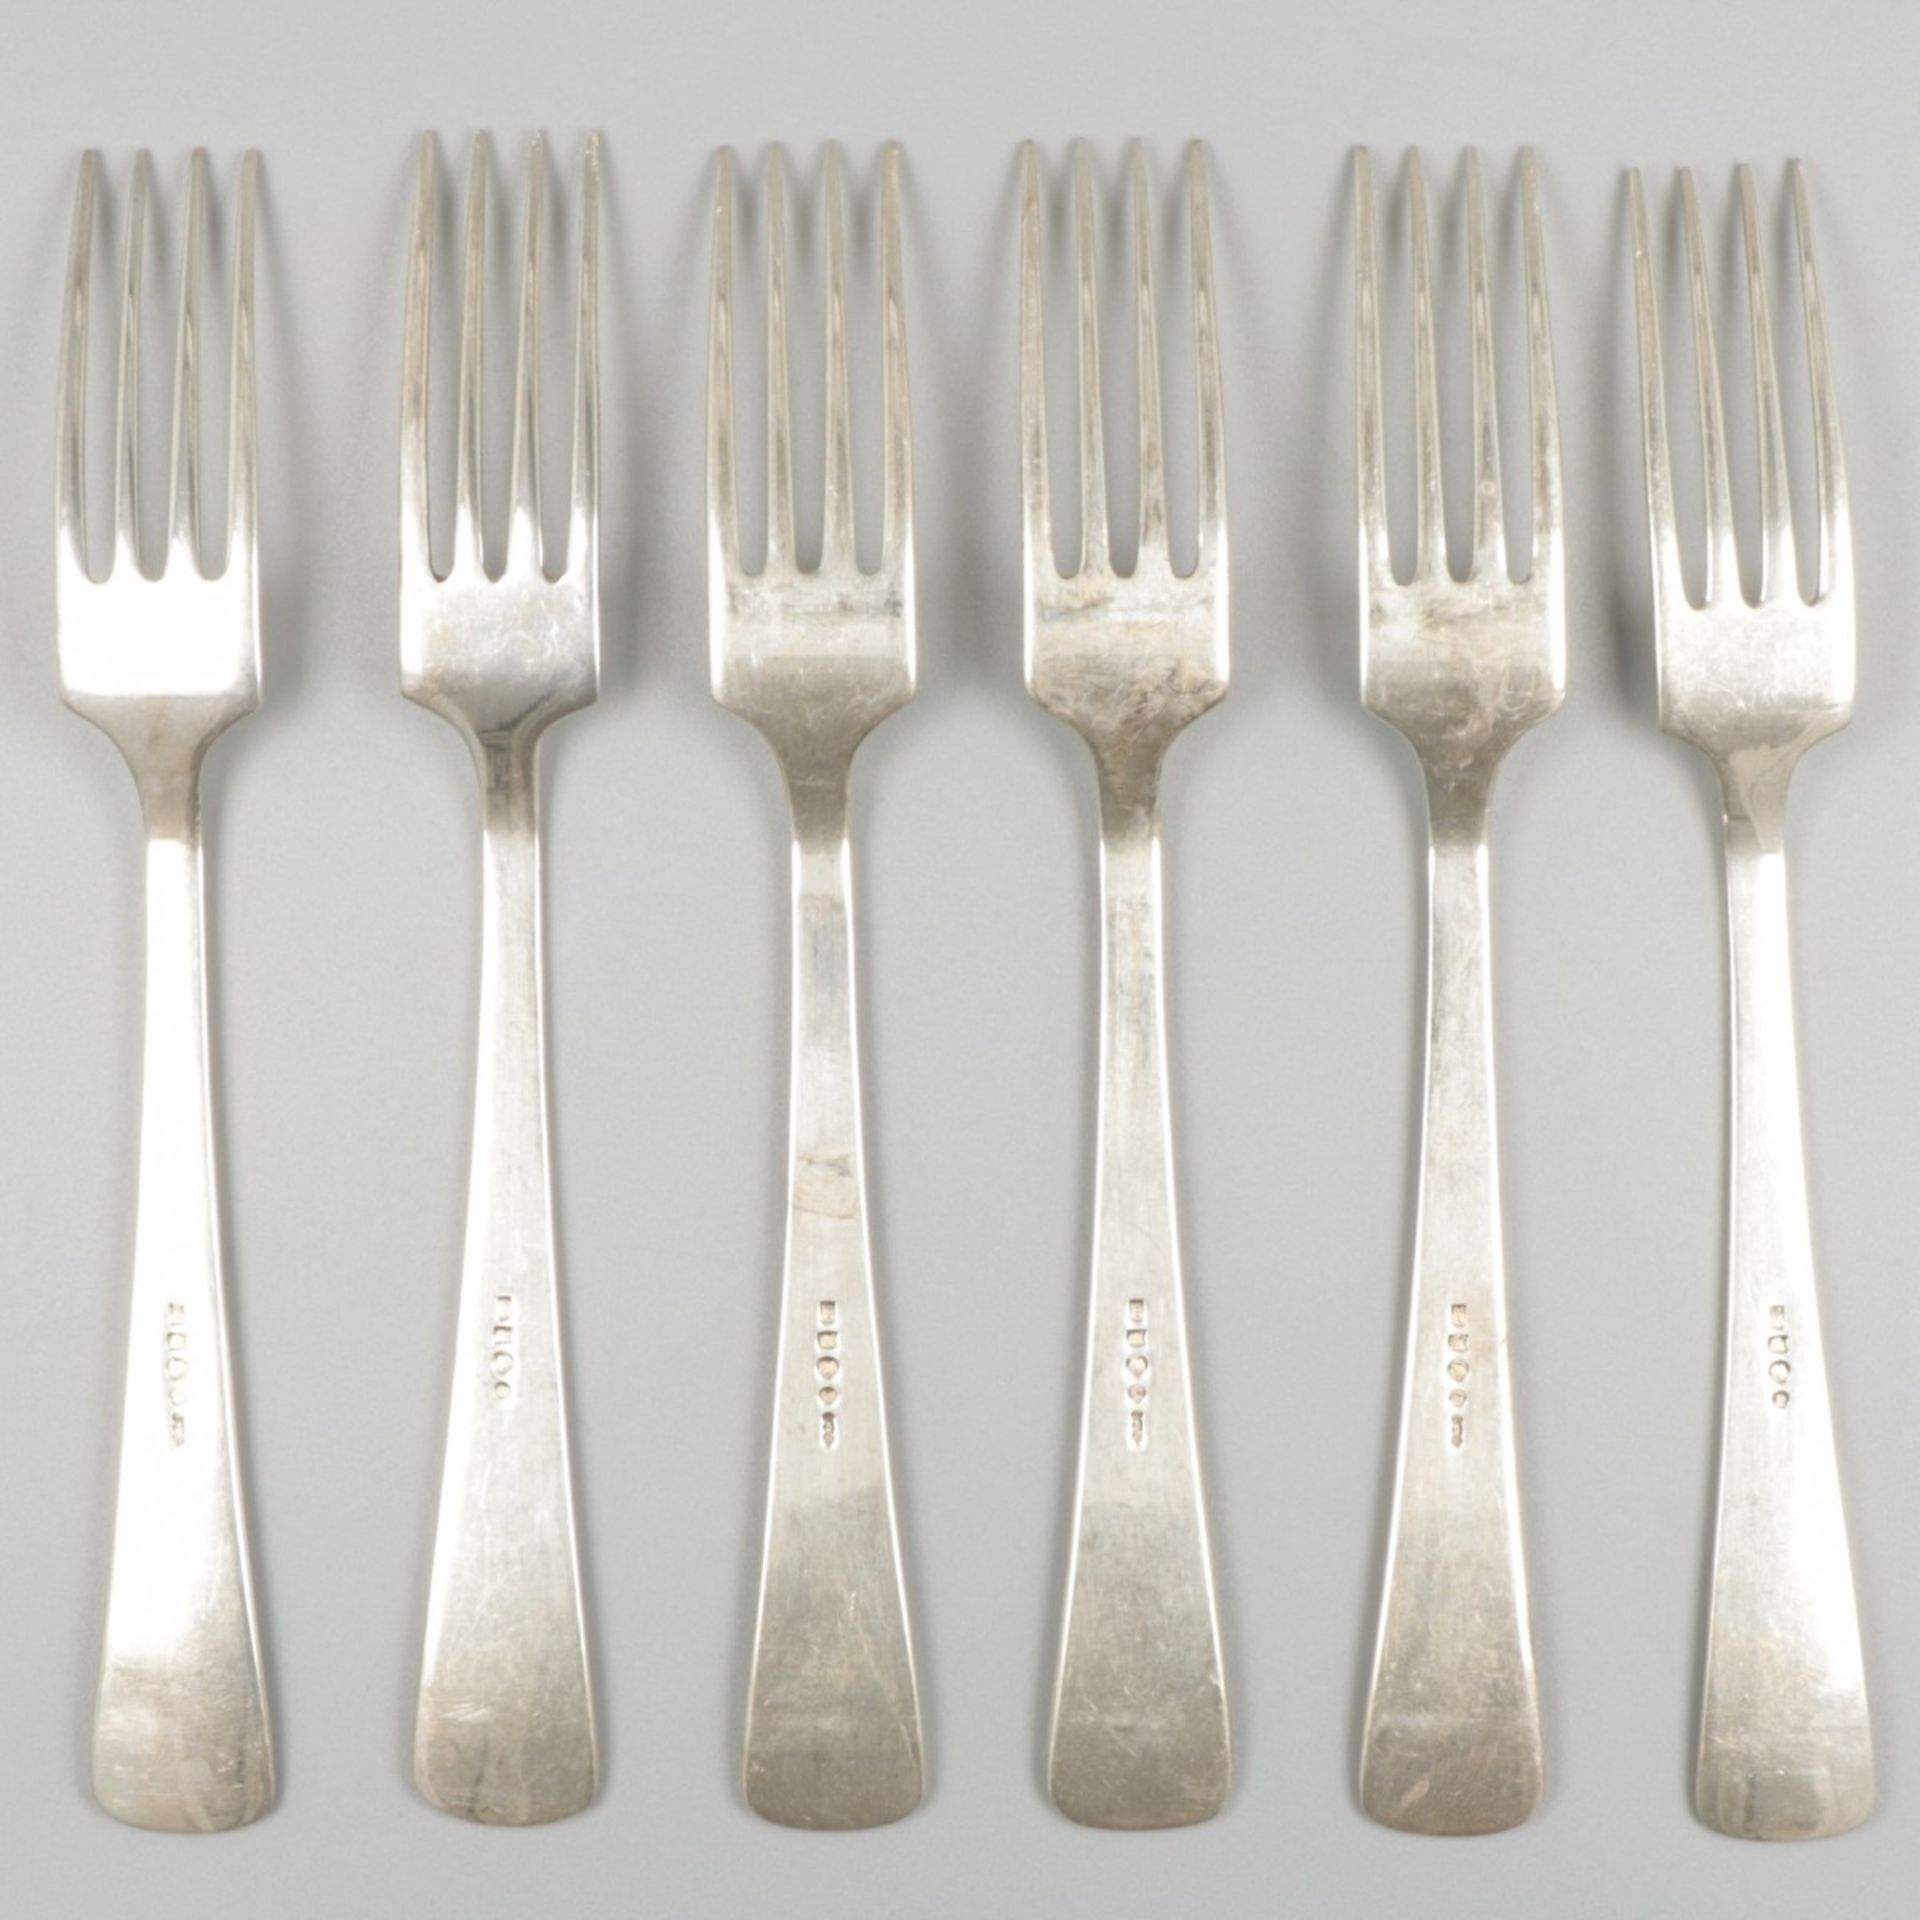 6-piece set of forks ''Haags Lofje'' silver. - Image 2 of 6